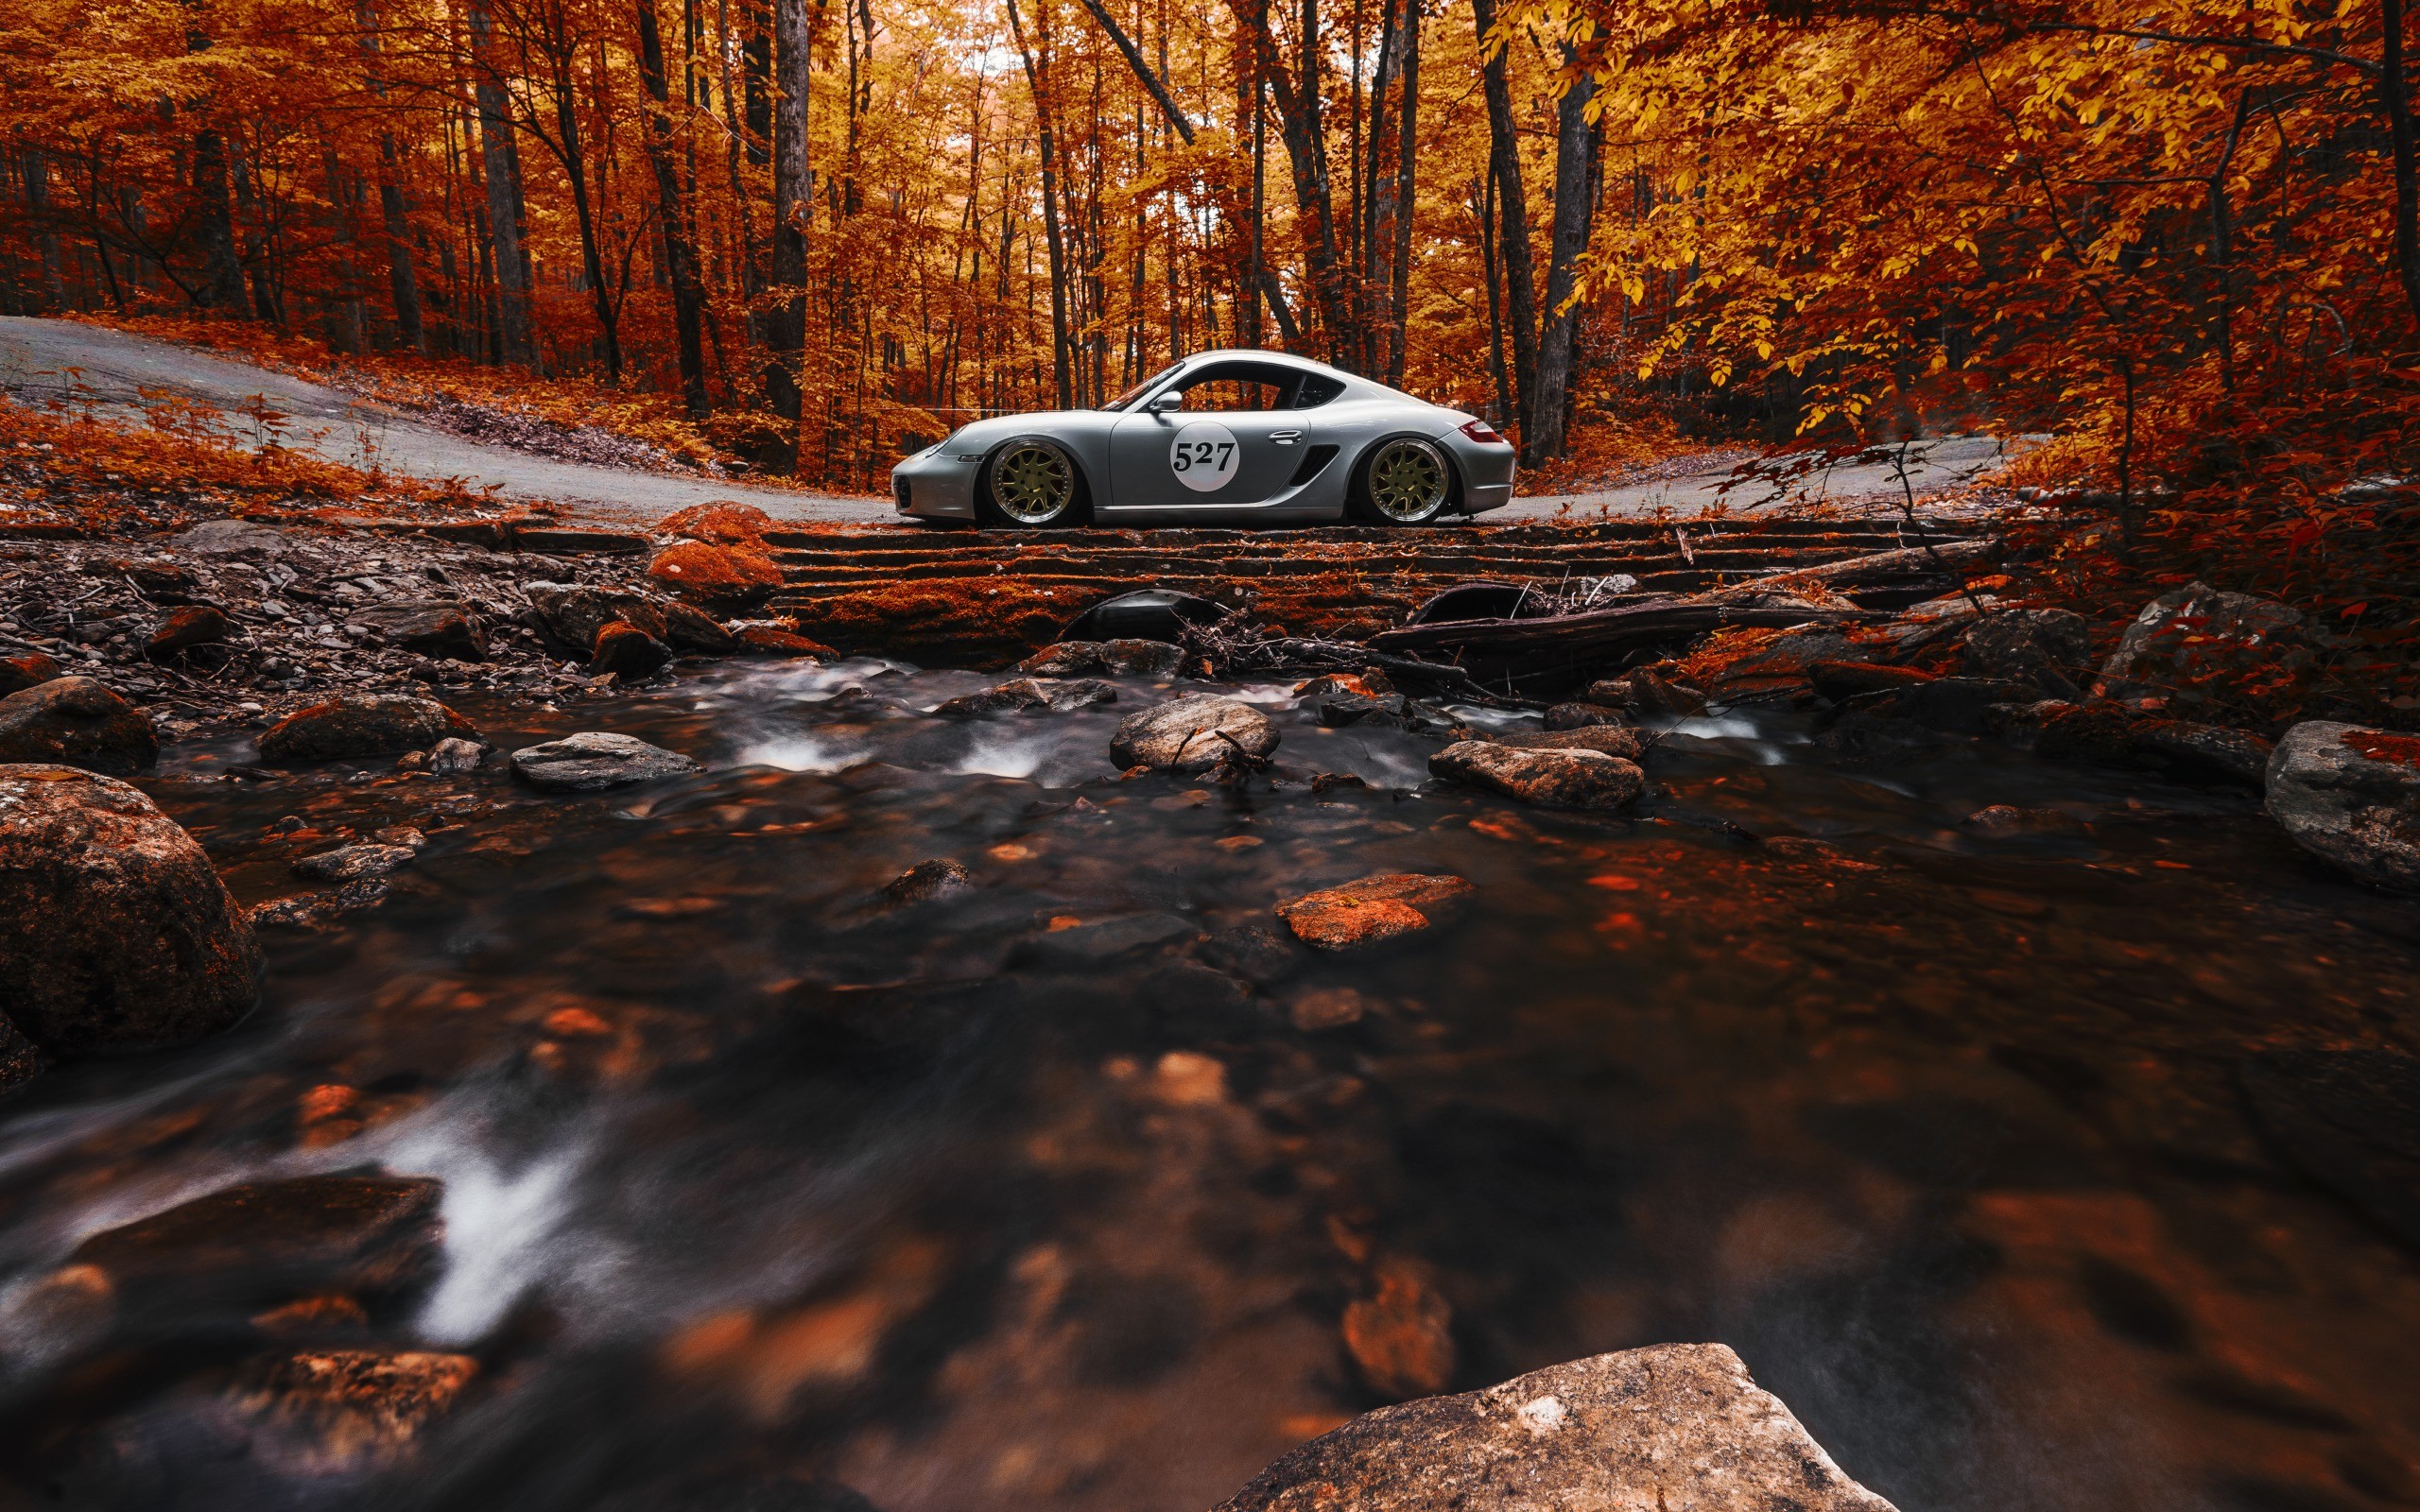 nature, Car, Trees, Forest, Fall, Vehicle, Leaves, Long Exposure, Stream, Stones, Road, Rock, Porsche Car, Side View Wallpapers HD / and Mobile Backgrounds